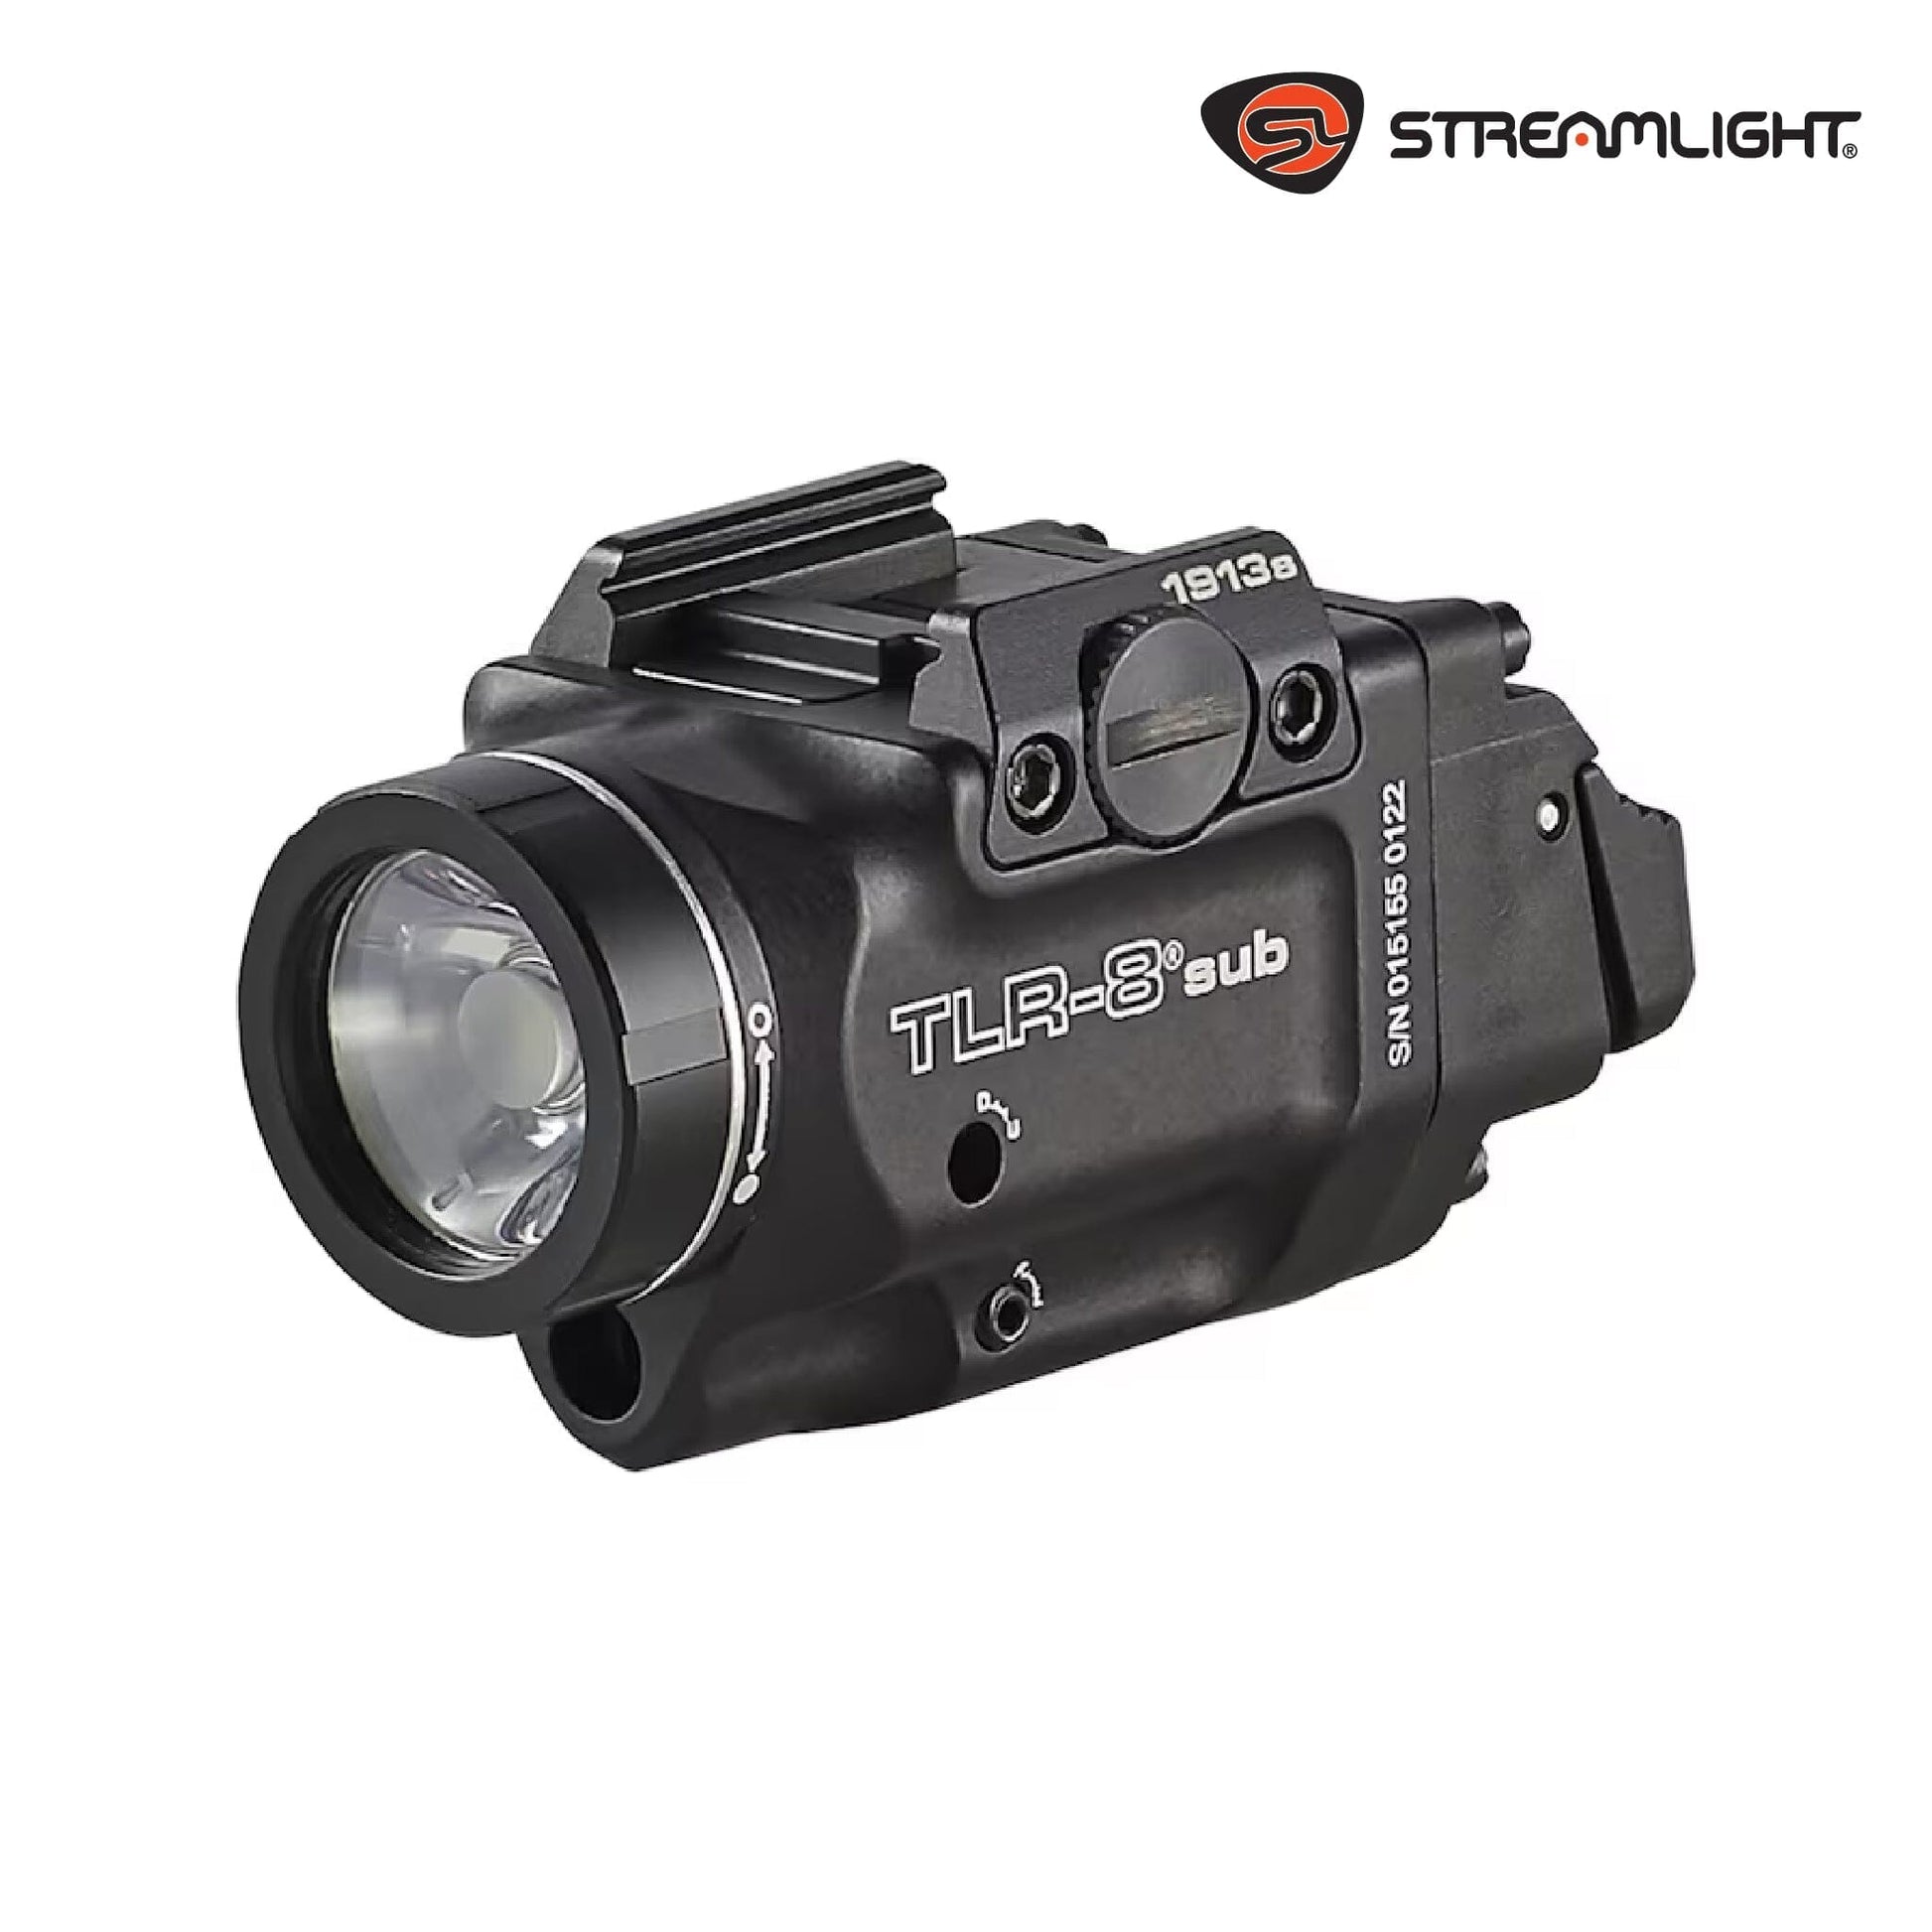 Streamlight TLR-8 Sub Weapon Light with Laser Weapon Light Streamlight 